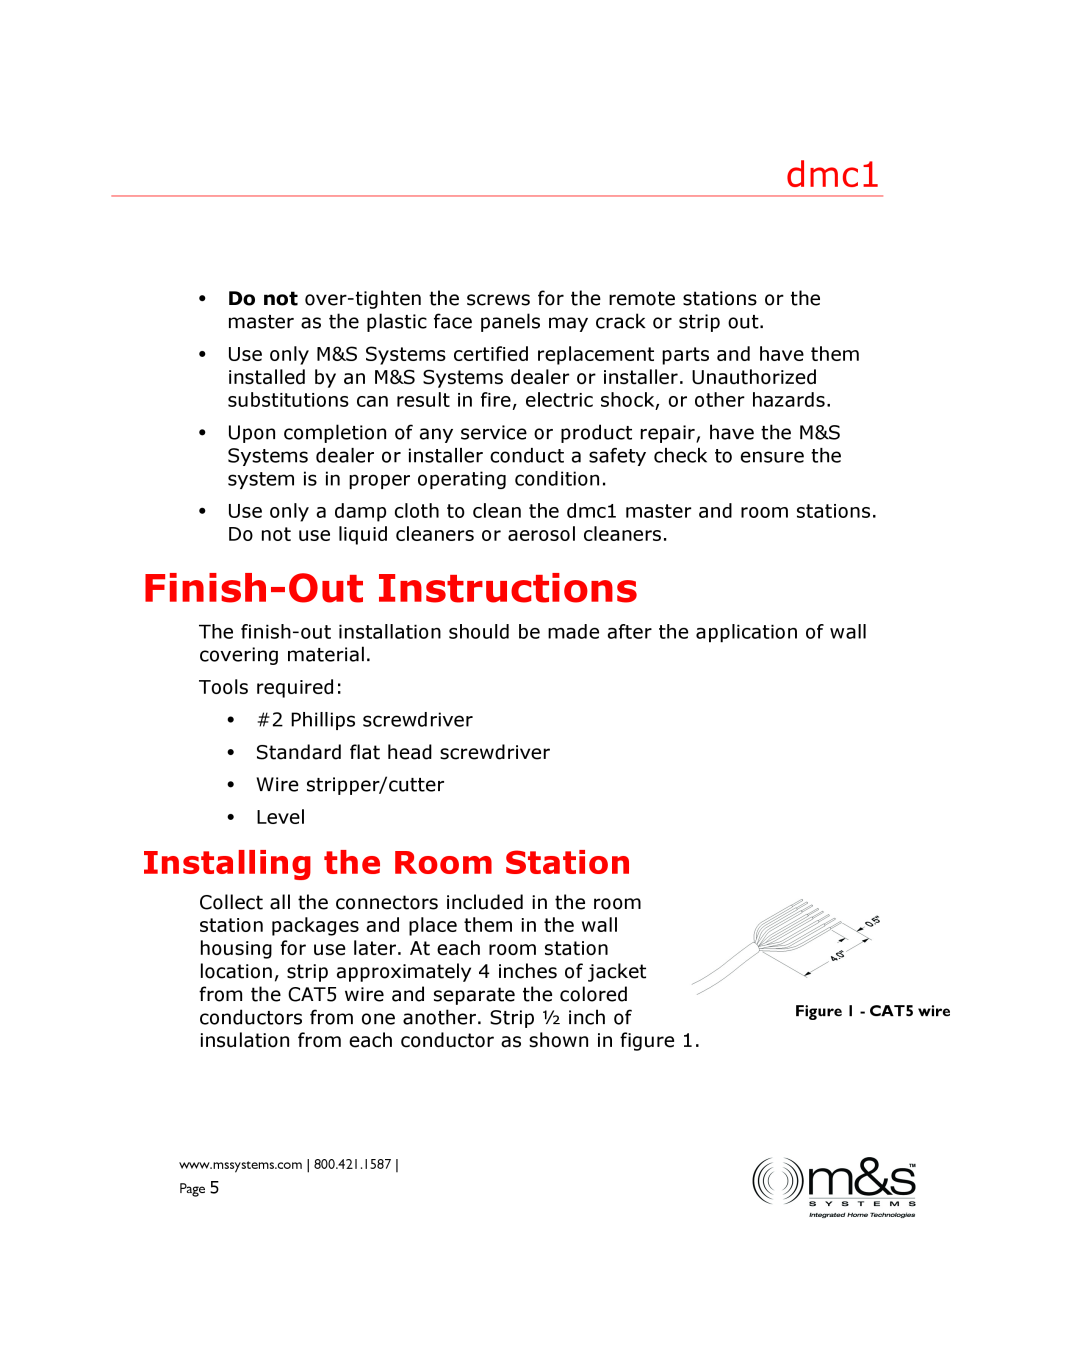 M&S Systems dmc1 manual Finish-Out Instructions, Installing the Room Station 